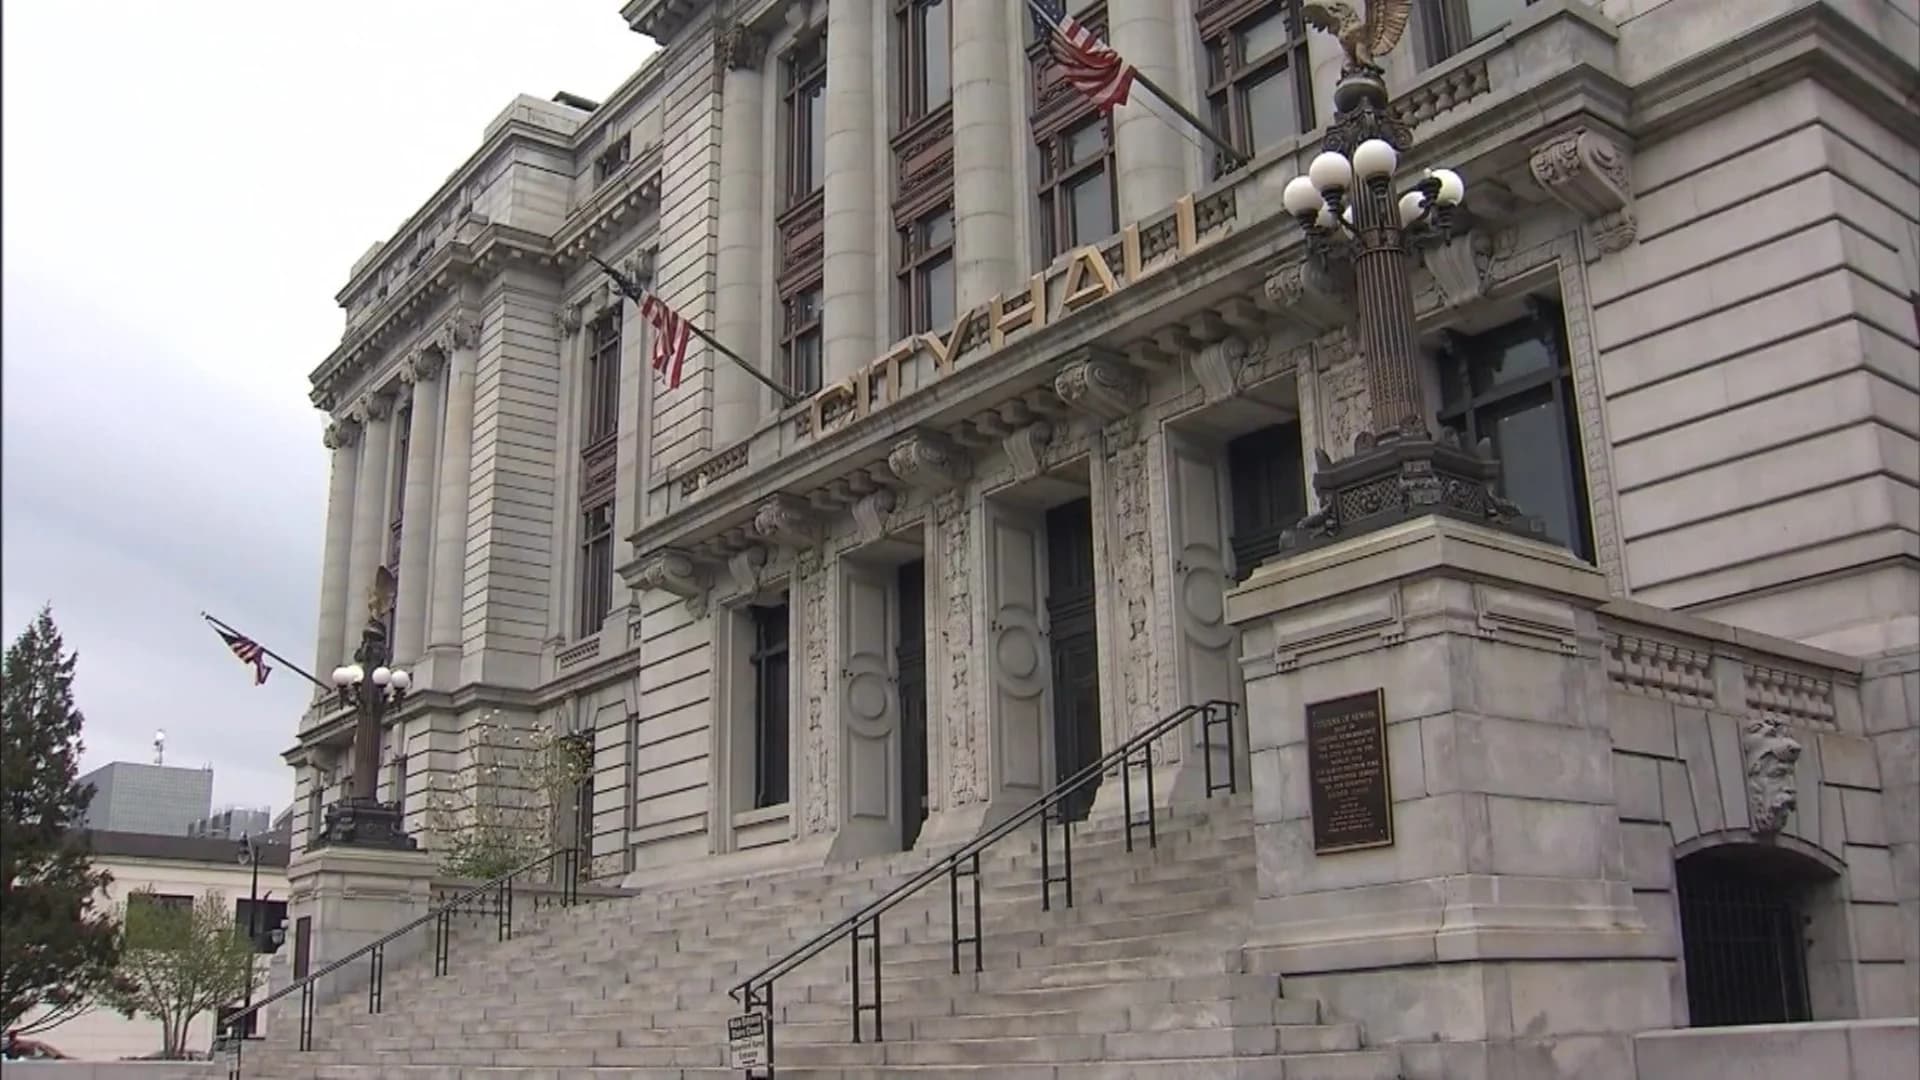 Computer issues prevent some Newark city employees from getting their paychecks